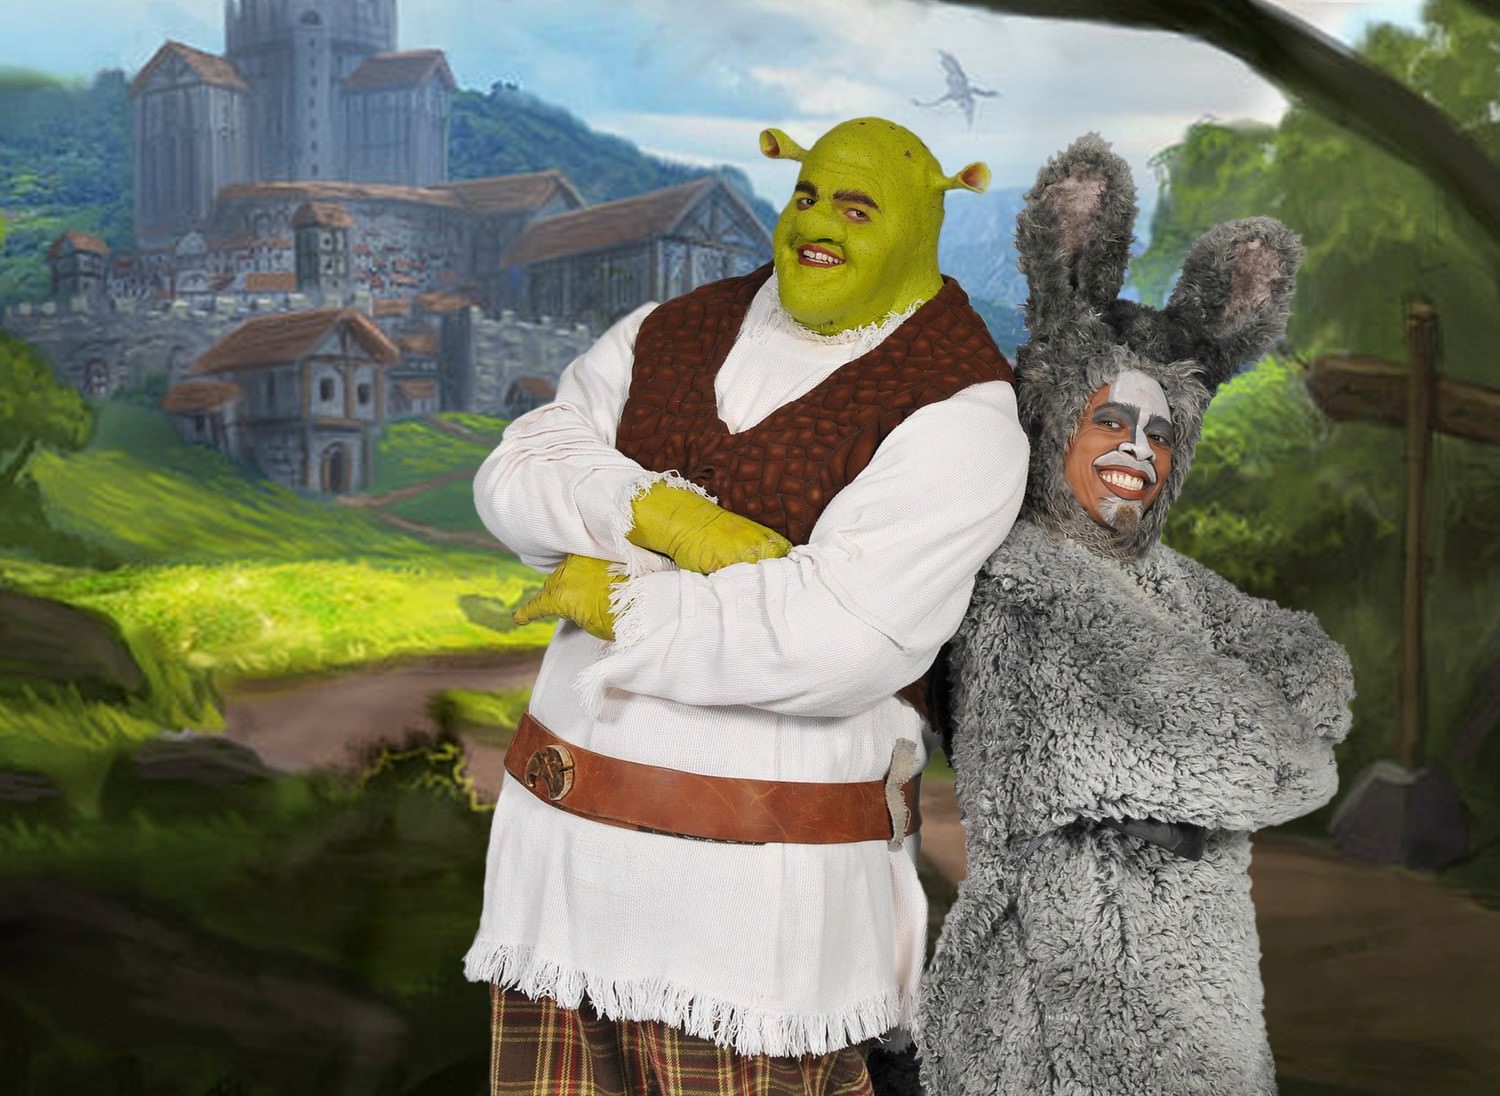 Here is our Shrek (Trent Mills) and Donkey (Lawrence Cummings), wait until you see all our cast in their costumes...you are going to love it!!! 